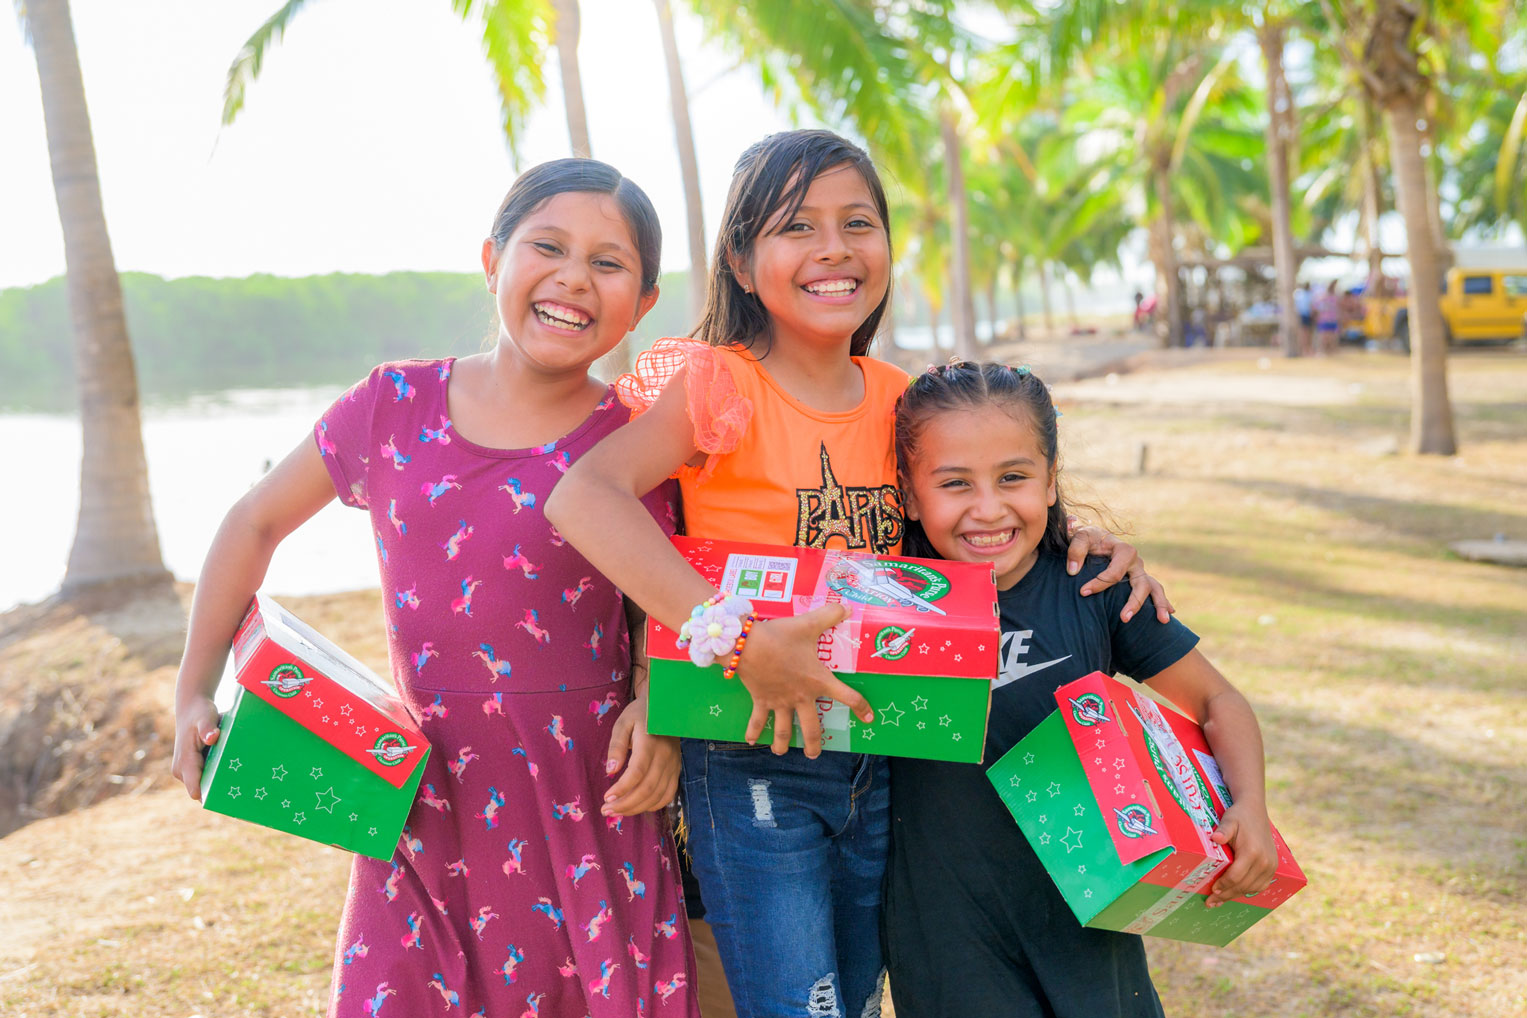 Children in Acapulco and the surrounding region of Guerrero state received special shoebox gifts during Operation Christmas Child outreach events.